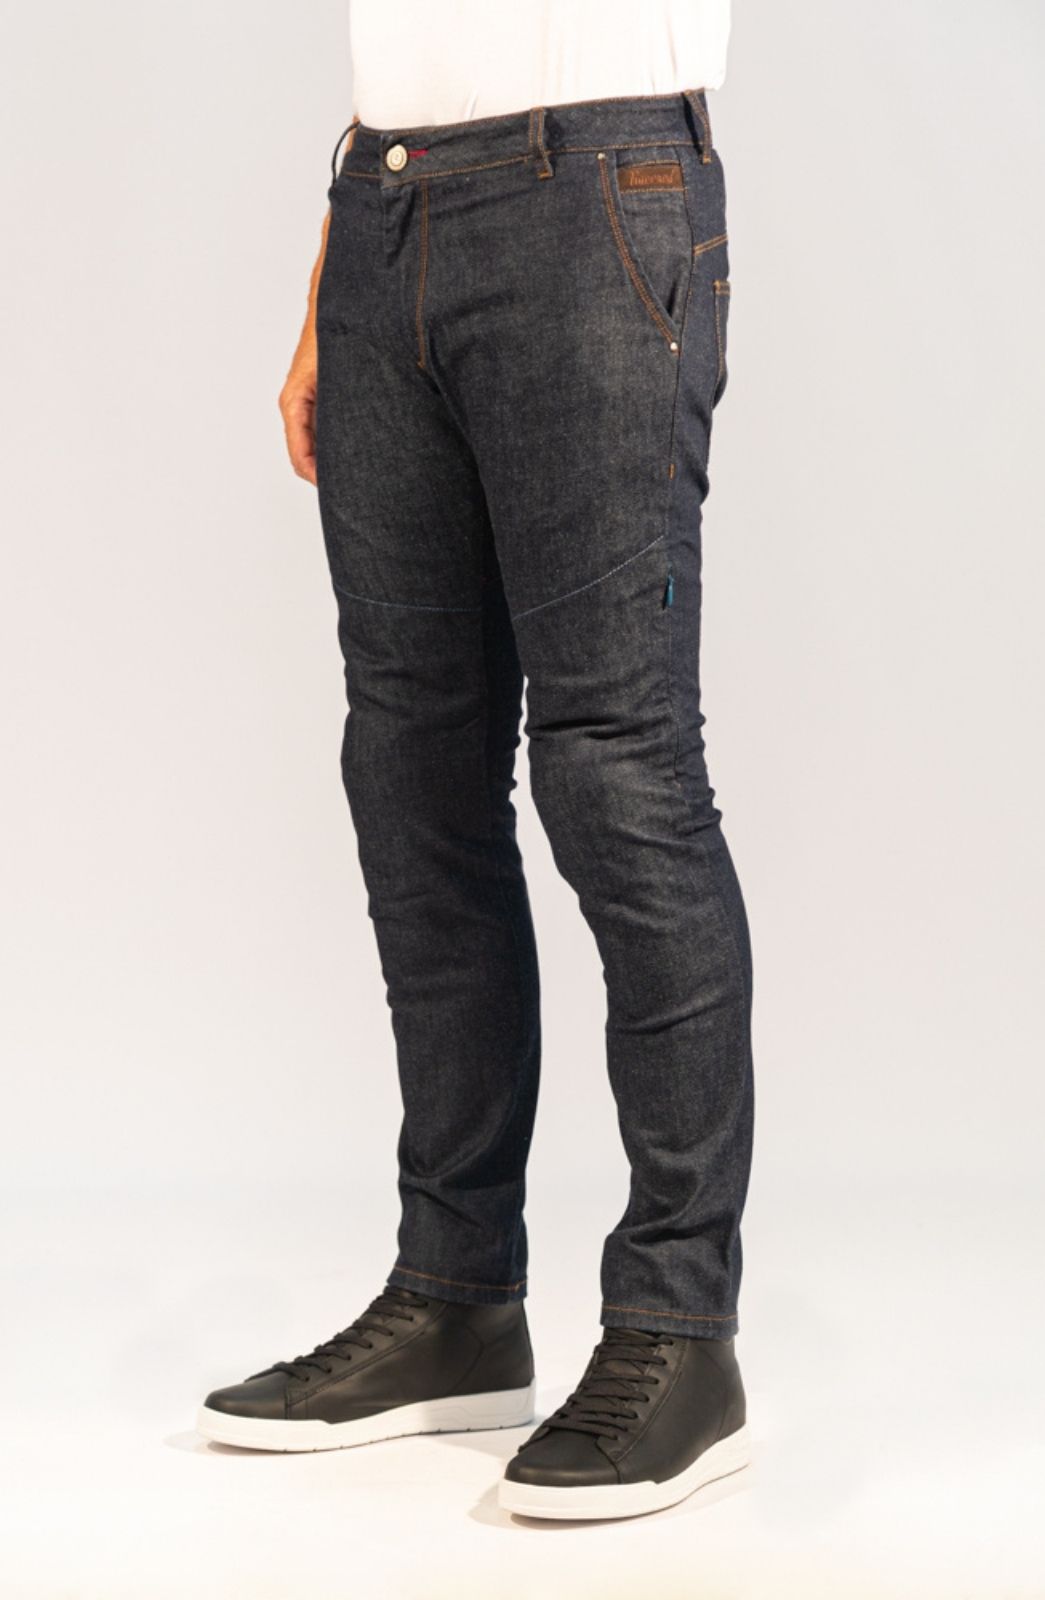 Men's and Women's Motorcycle Jeans | Racered